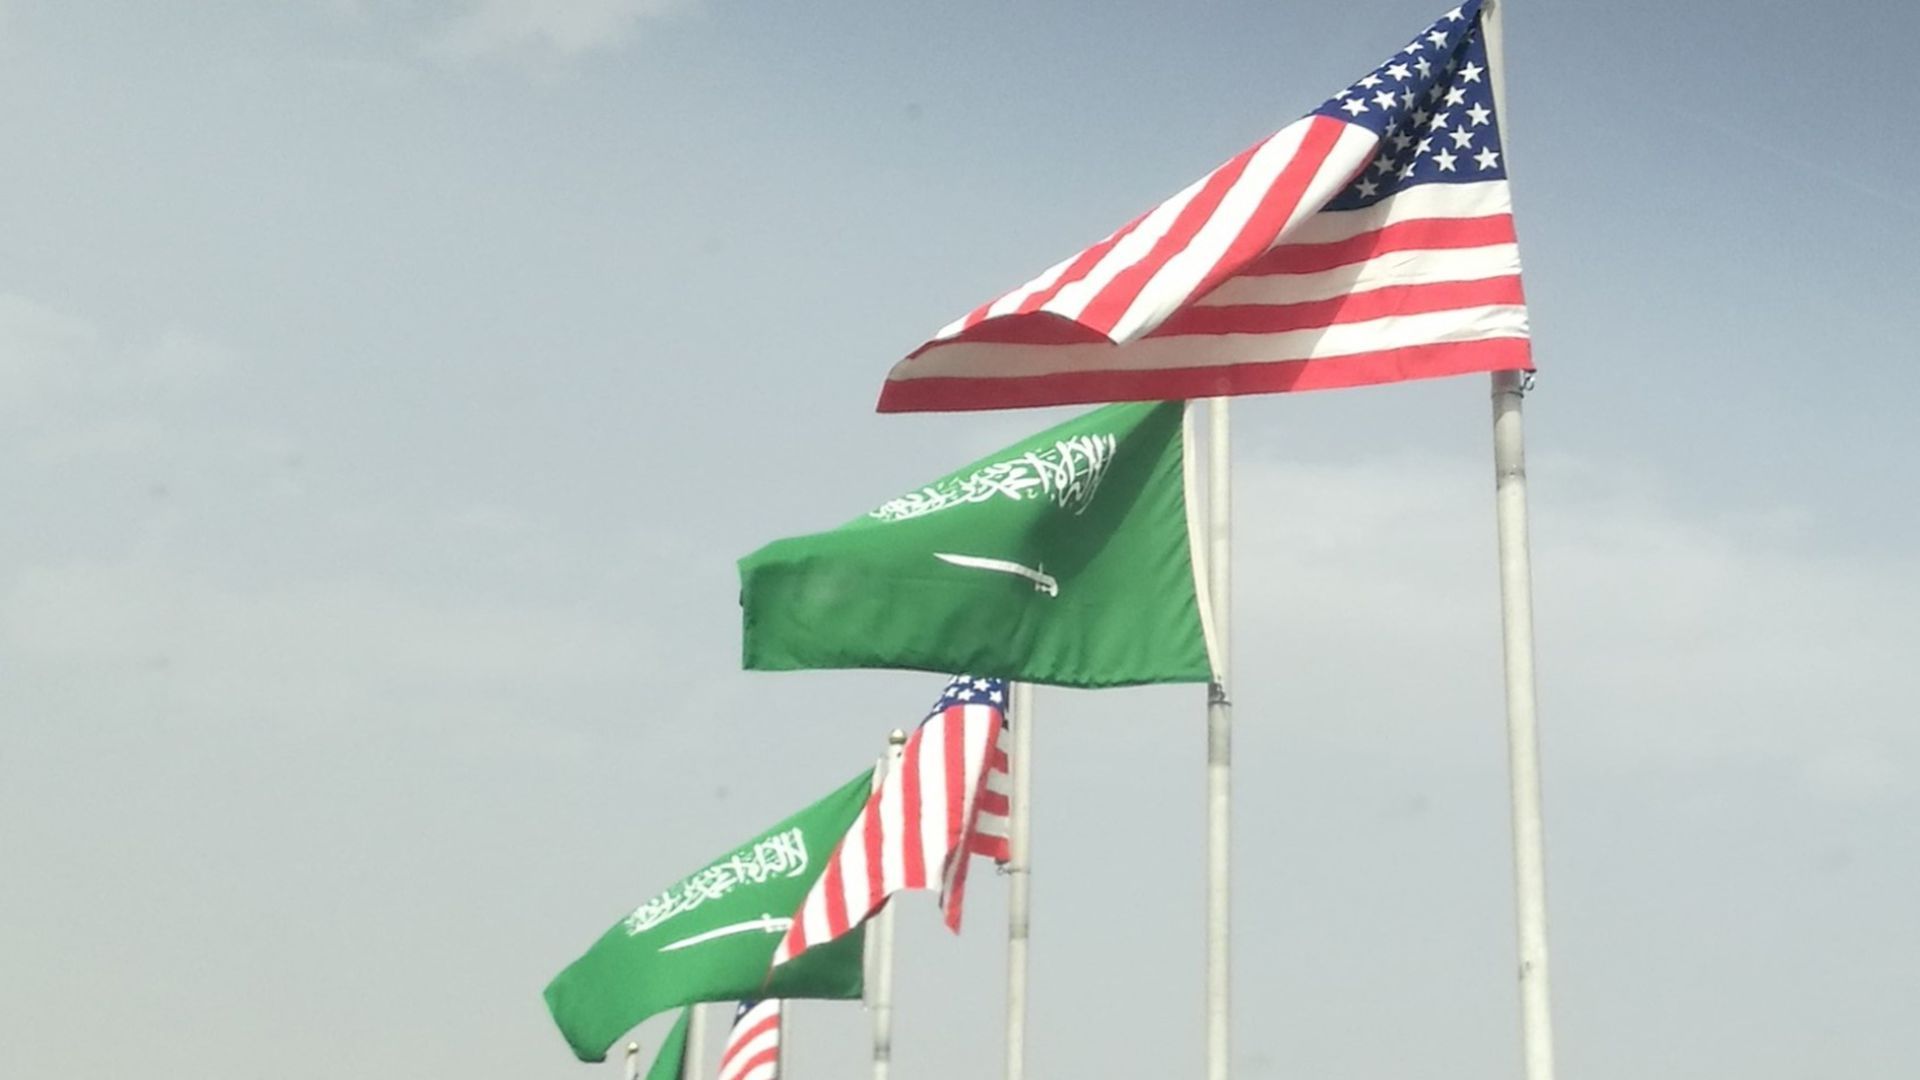 Flags of both United States and Saudi Arabia are raised in Riyadh on May 18, 2017. Photo: Ahmed Youssef Elsayed Abdelrehim/Anadolu Agency/Getty Images